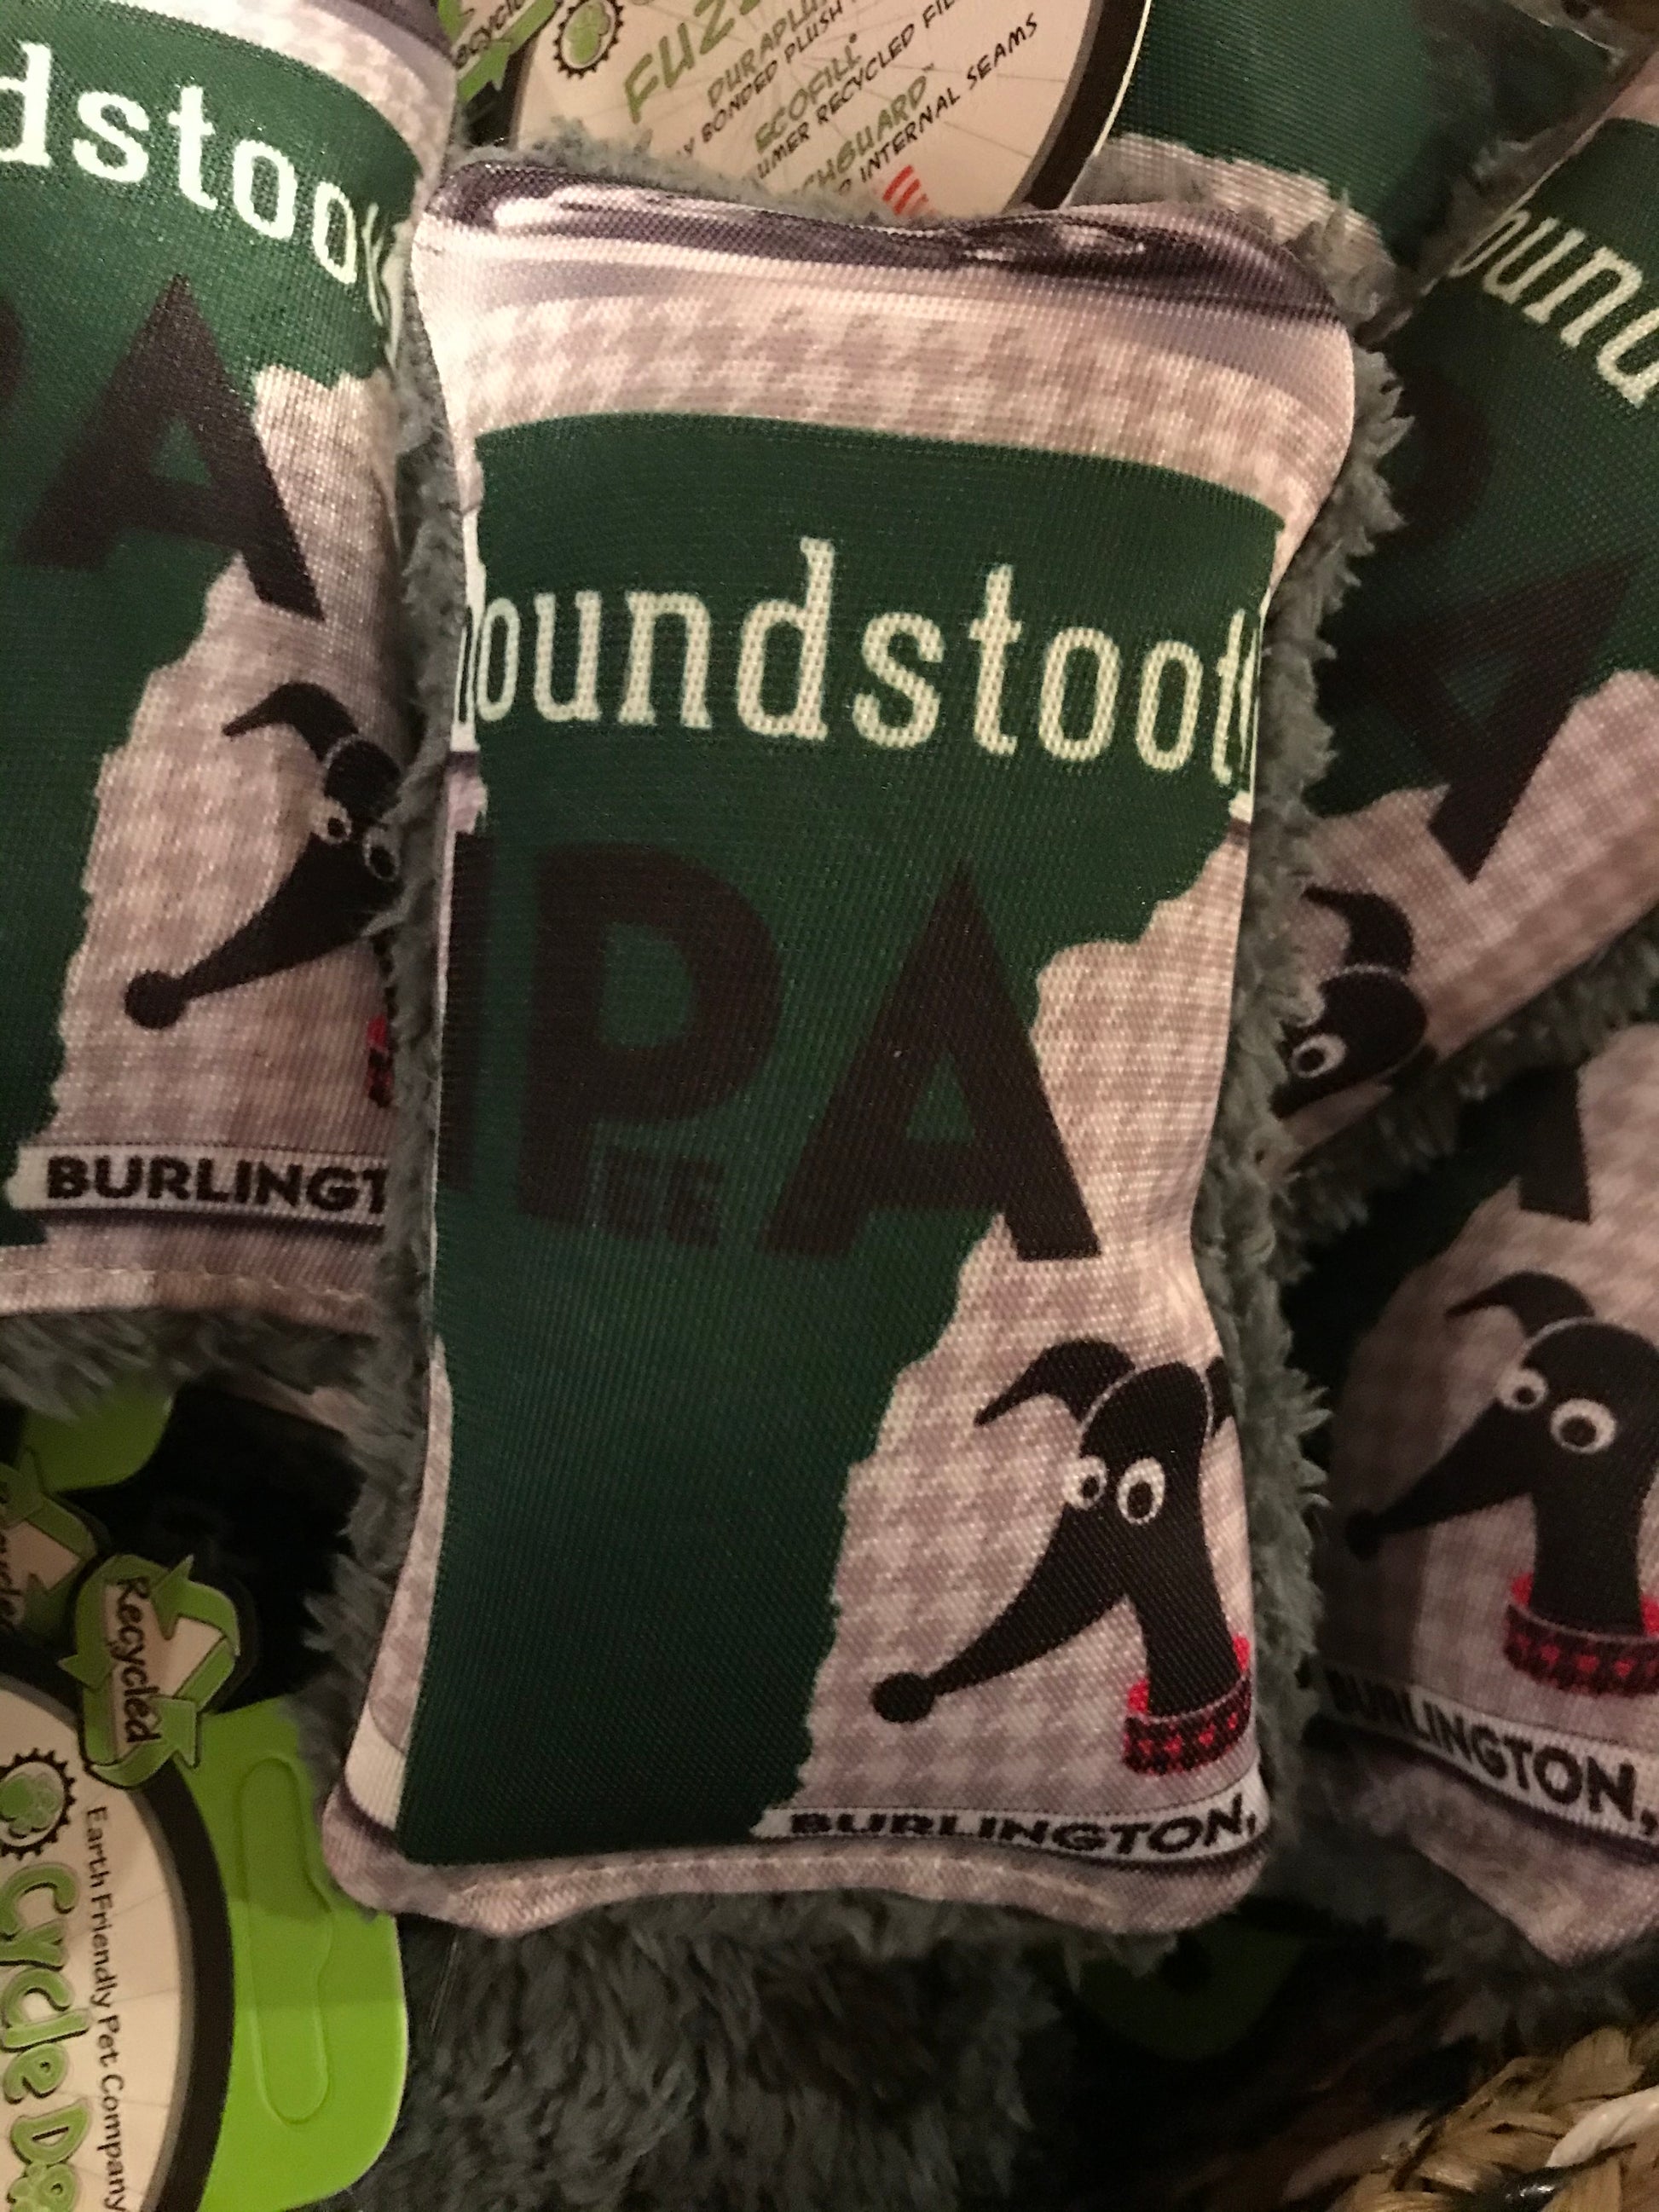 Houndstooth IPA plush toy